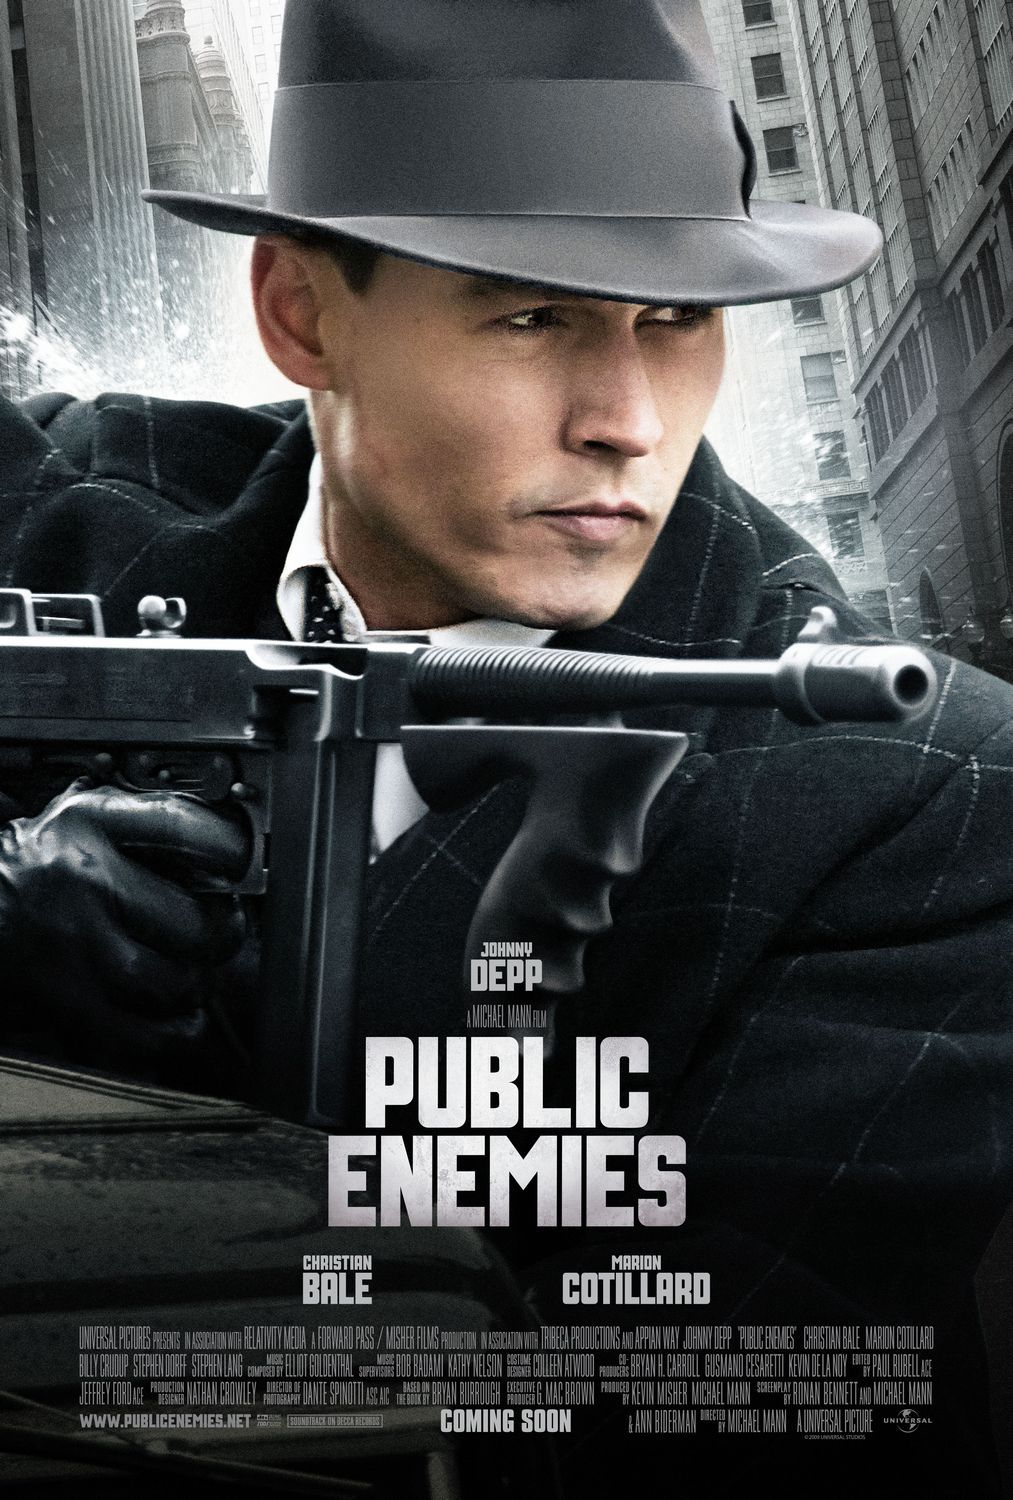 You are currently viewing Notes On A Film: Public Enemies